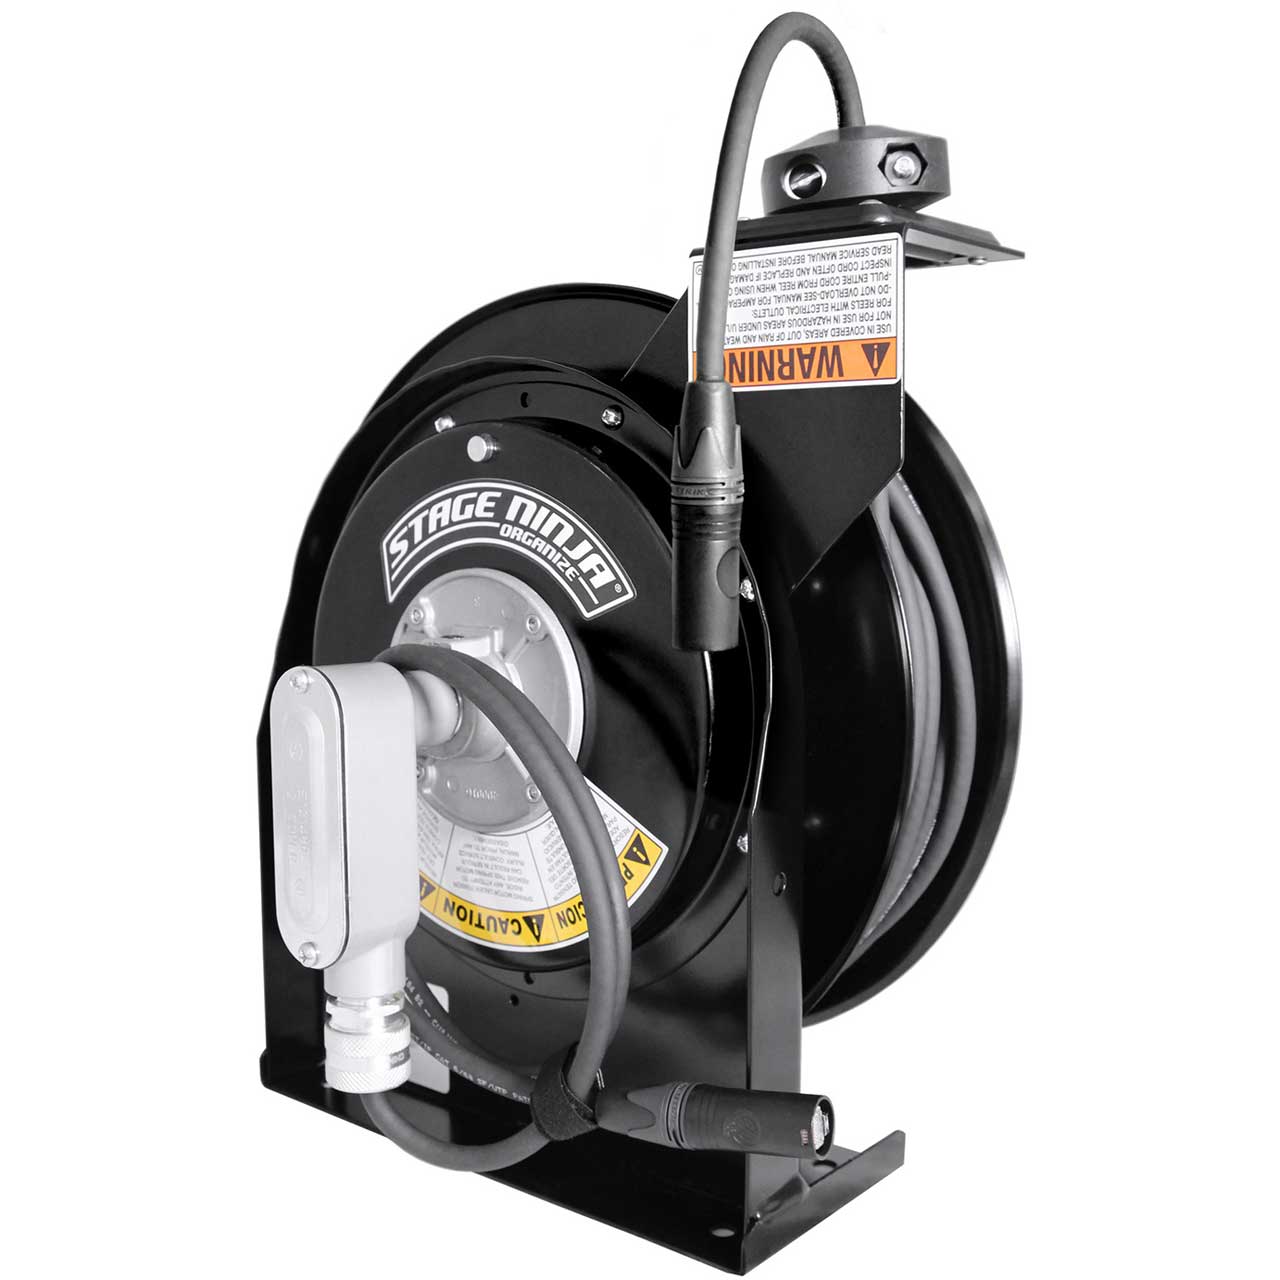 Stage Ninja SN-CAT6-65-S 65 ft. Retractable Cat6 Cable Reel at